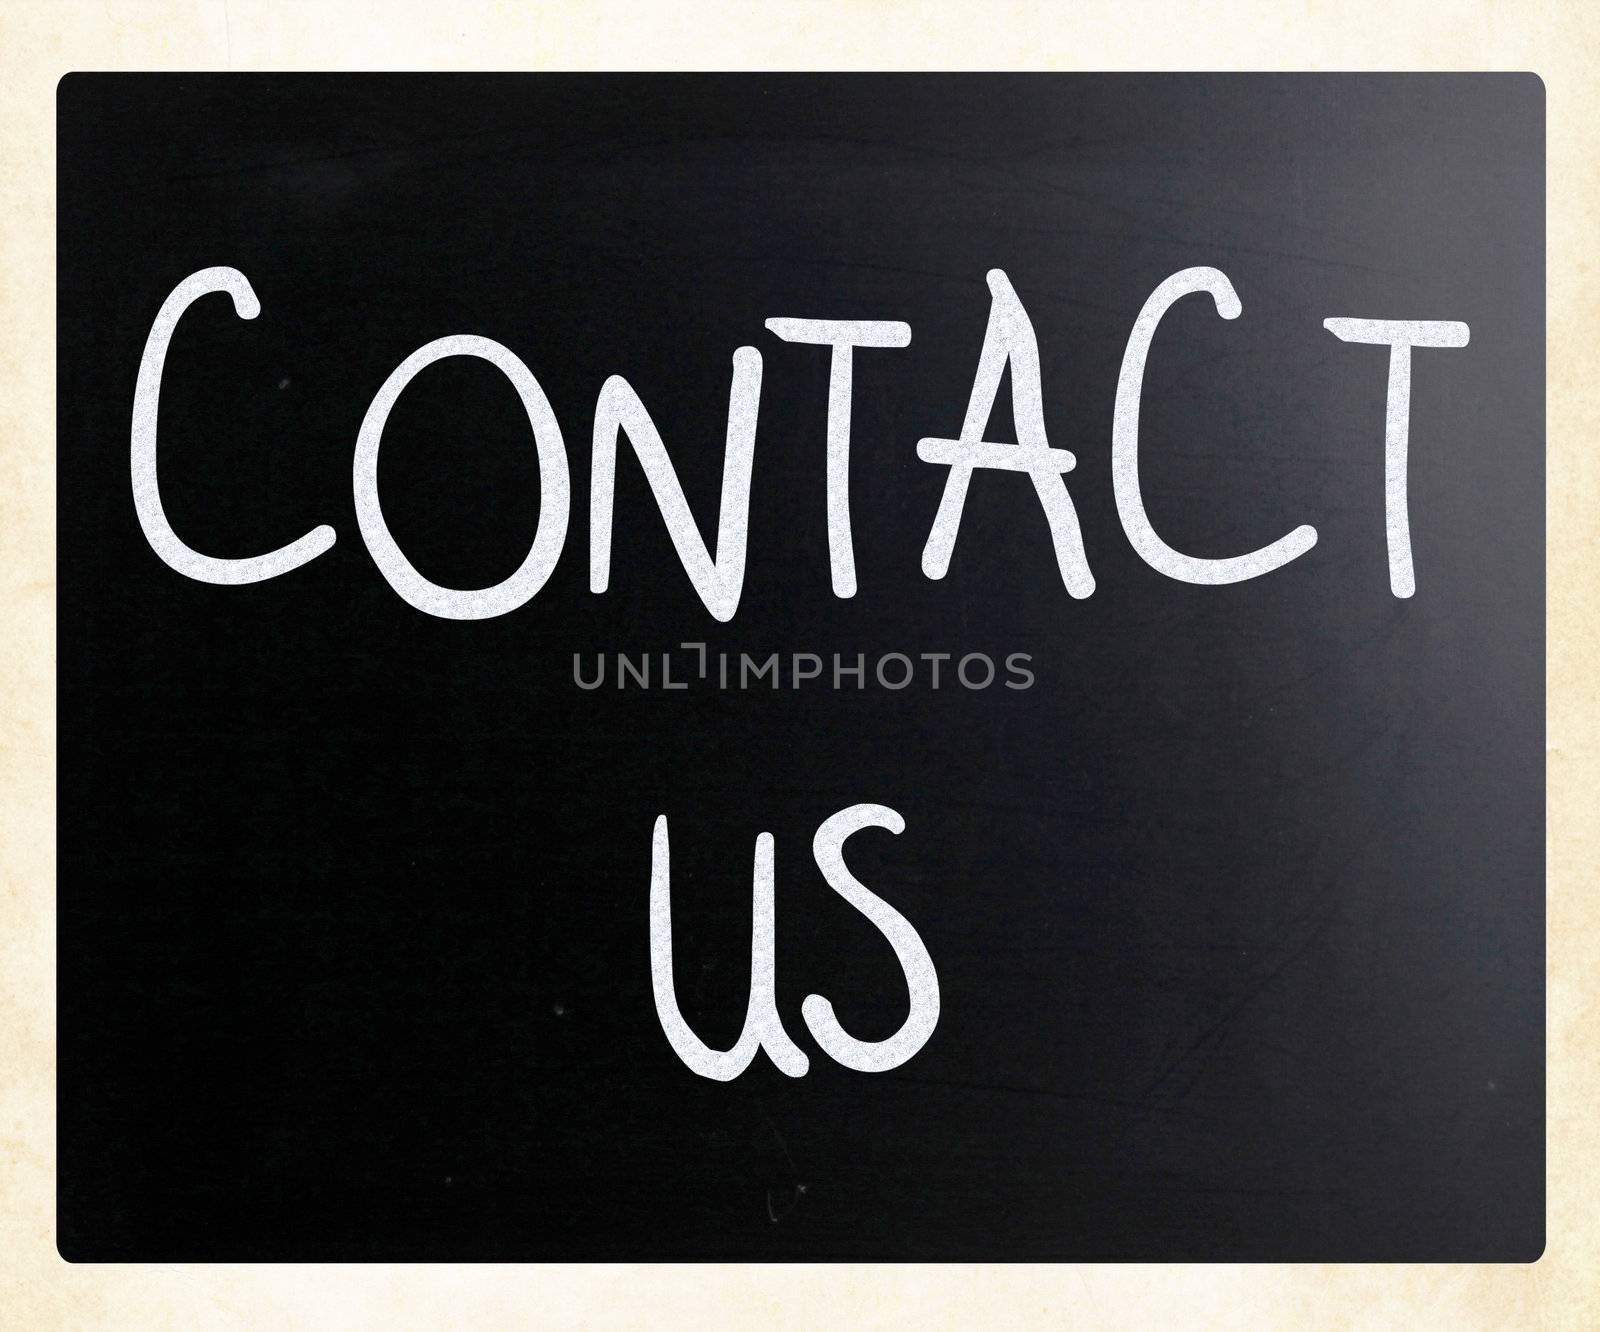 "Contact Us" handwritten with white chalk on a blackboard